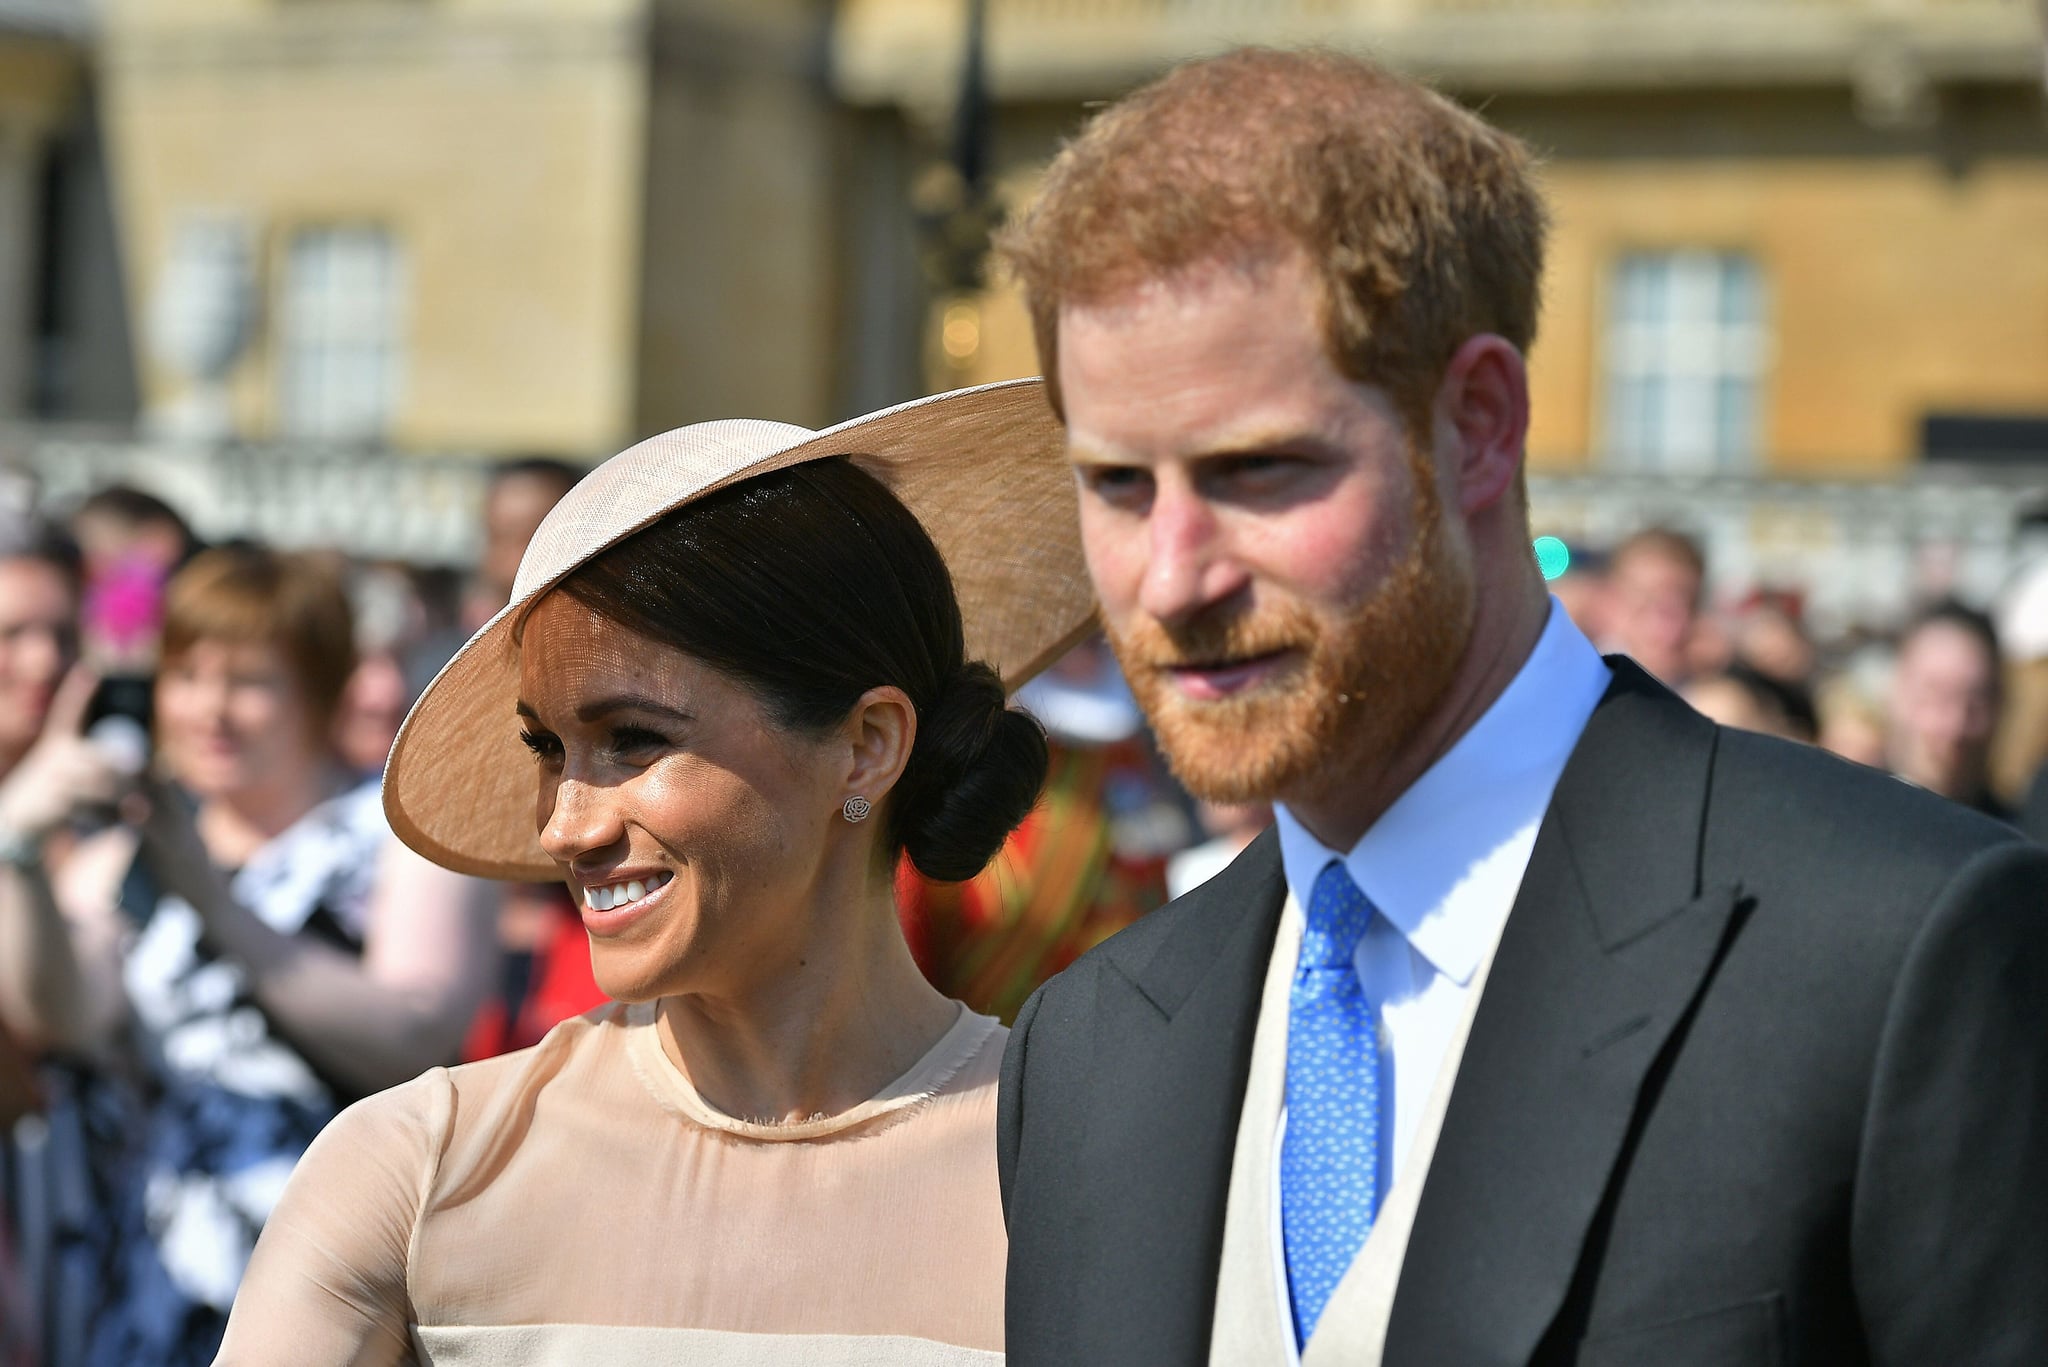 Britain's Prince Harry, Duke of Sussex (R), and his new wife, Britain's Meghan, Duchess of Sussex, attend the Prince of Wales's 70th Birthday Garden Party at Buckingham Palace in London on May 22, 2018. - The Prince of Wales and The Duchess of Cornwall hosted a Garden Party to celebrate the work of The Prince's Charities in the year of Prince Charles's 70th Birthday. (Photo by Dominic Lipinski / POOL / AFP)        (Photo credit should read DOMINIC LIPINSKI/AFP/Getty Images)